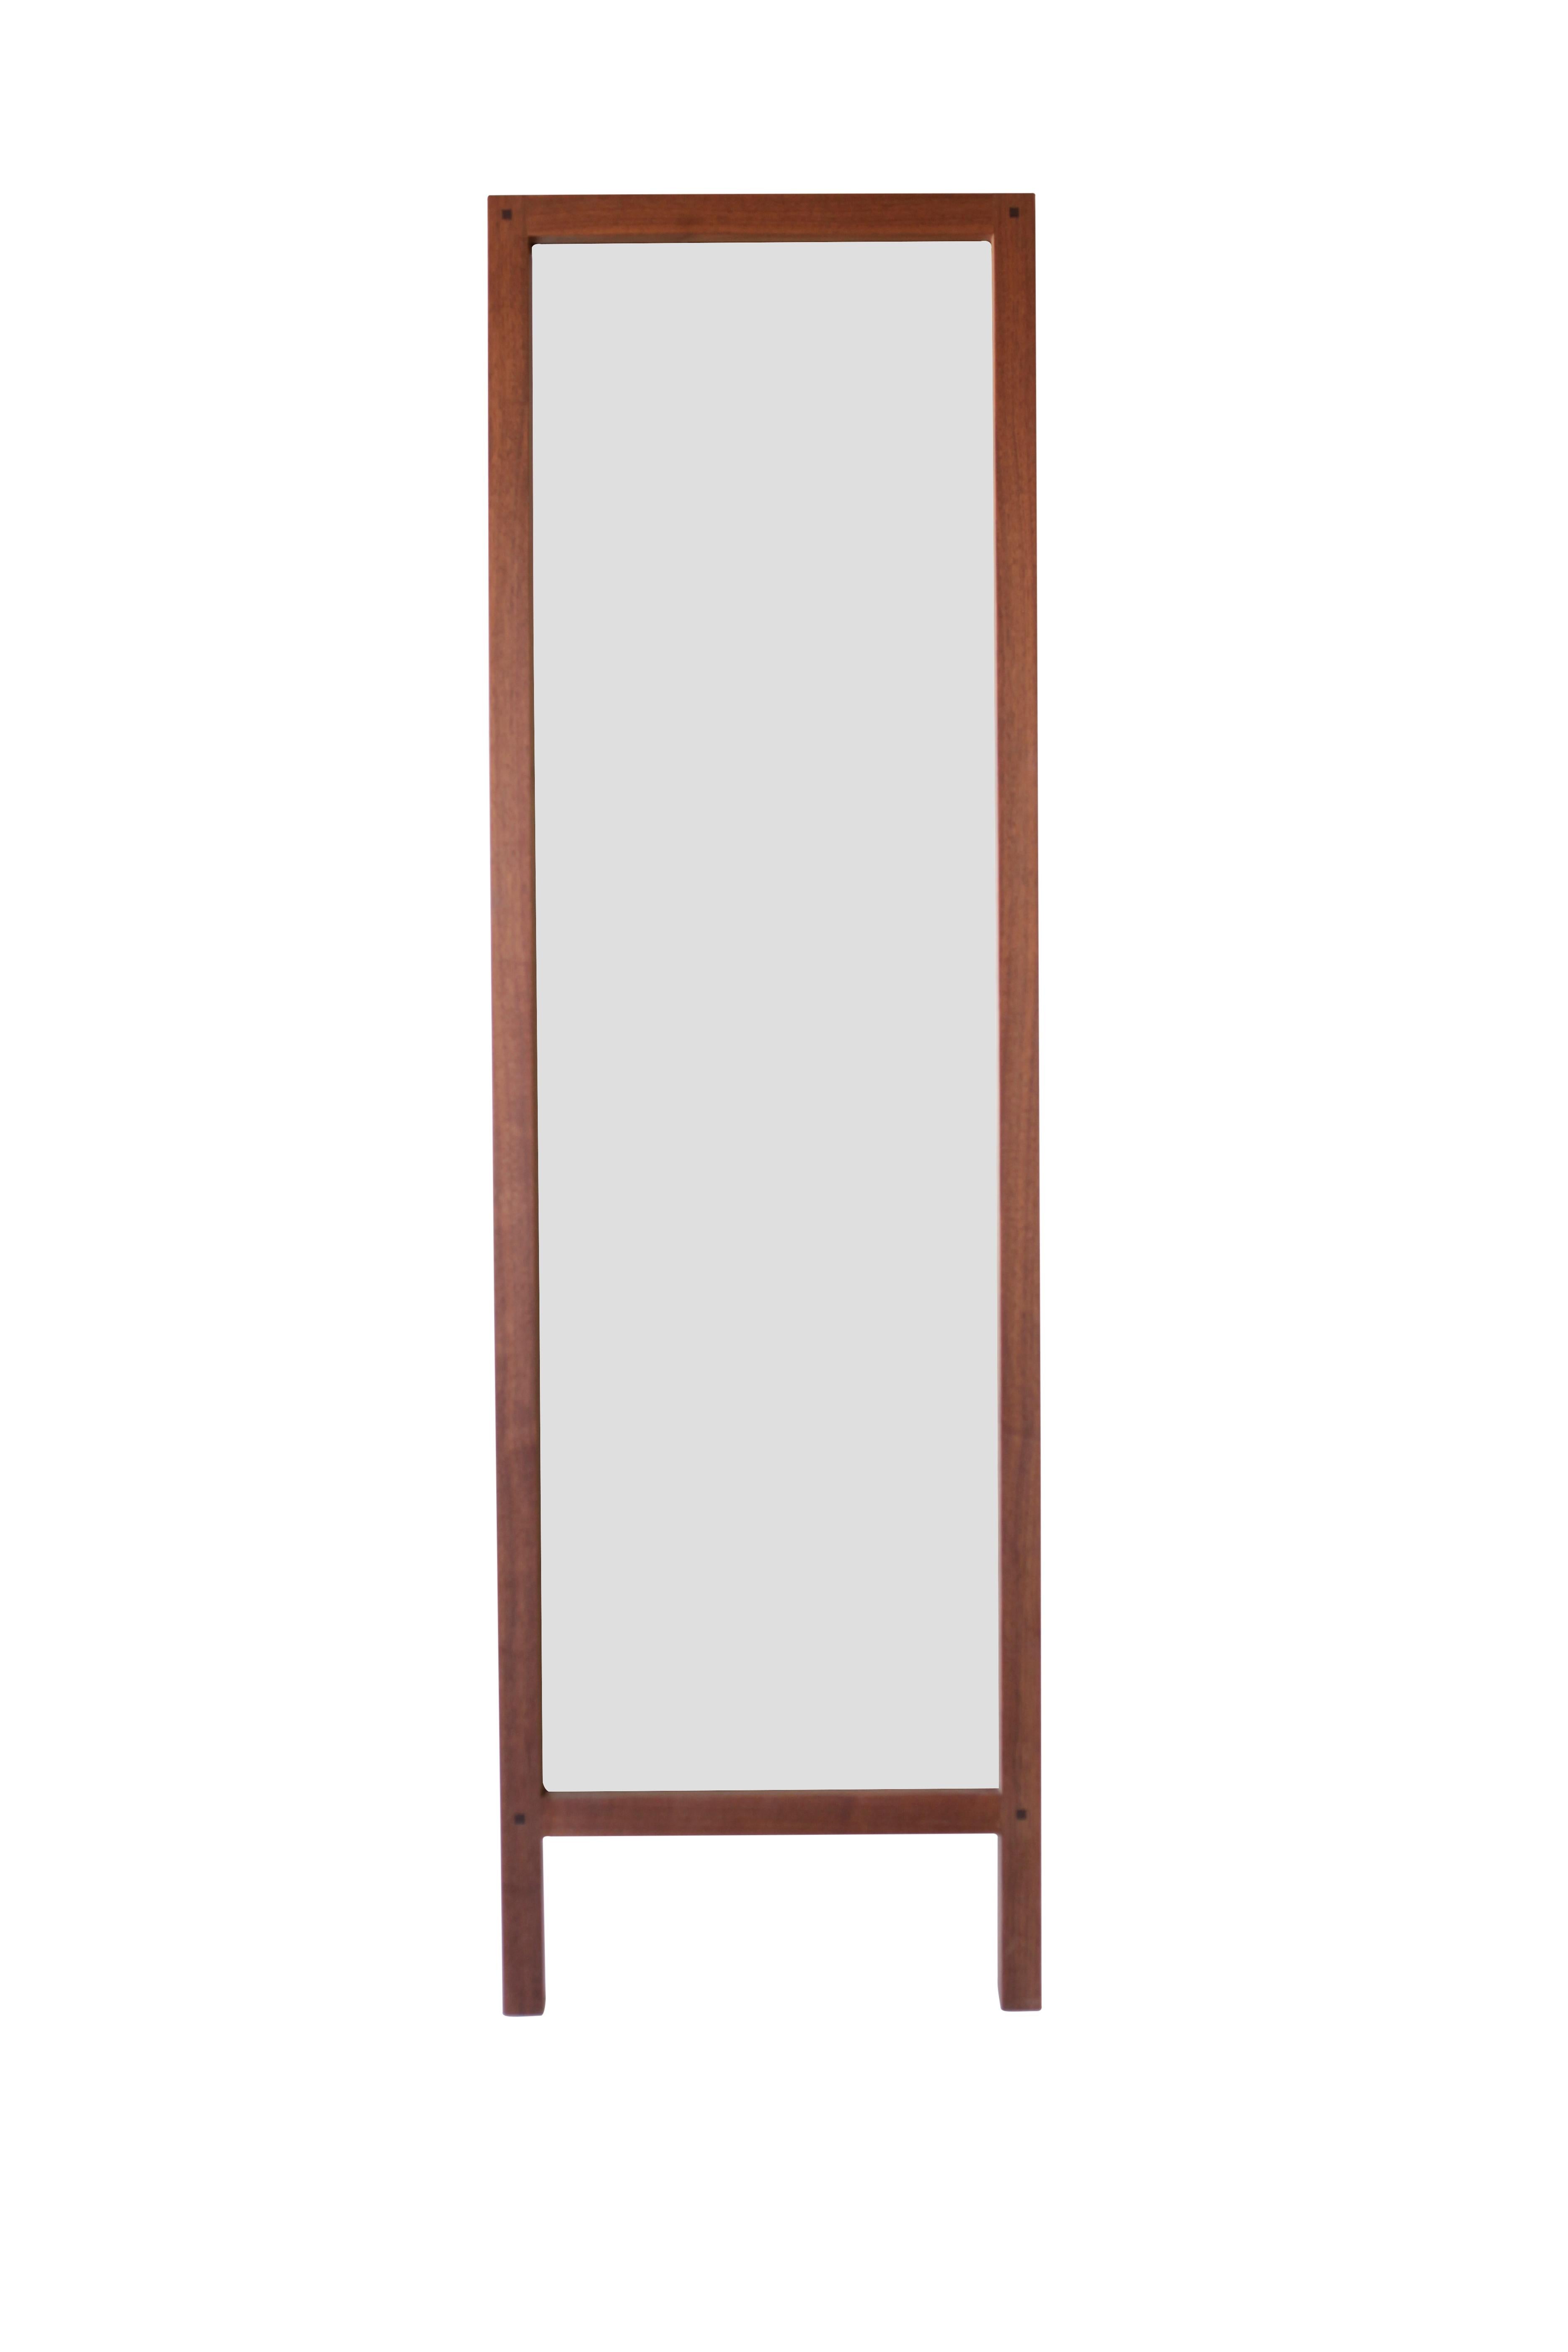 Standing Mirror in Walnut with Bridle Joints and Wenge Pegs by Boyd & Allister In New Condition For Sale In Santa Fe, NM